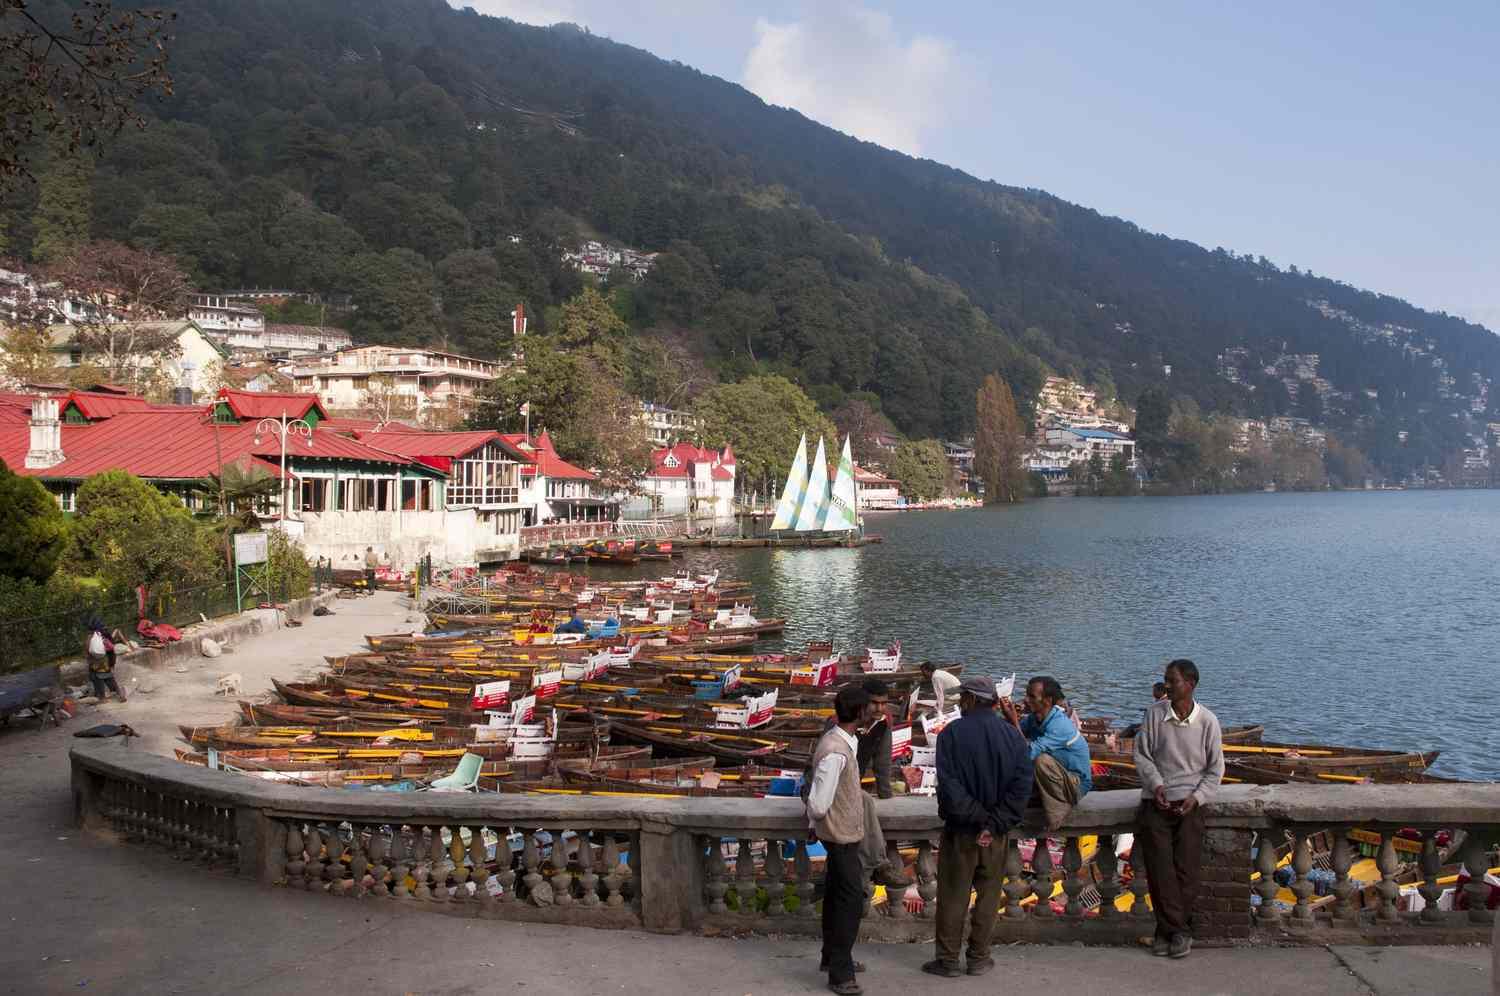 Plan a weekend trip to Nainital from Delhi where you can spend an amazing time in the tranquil environment